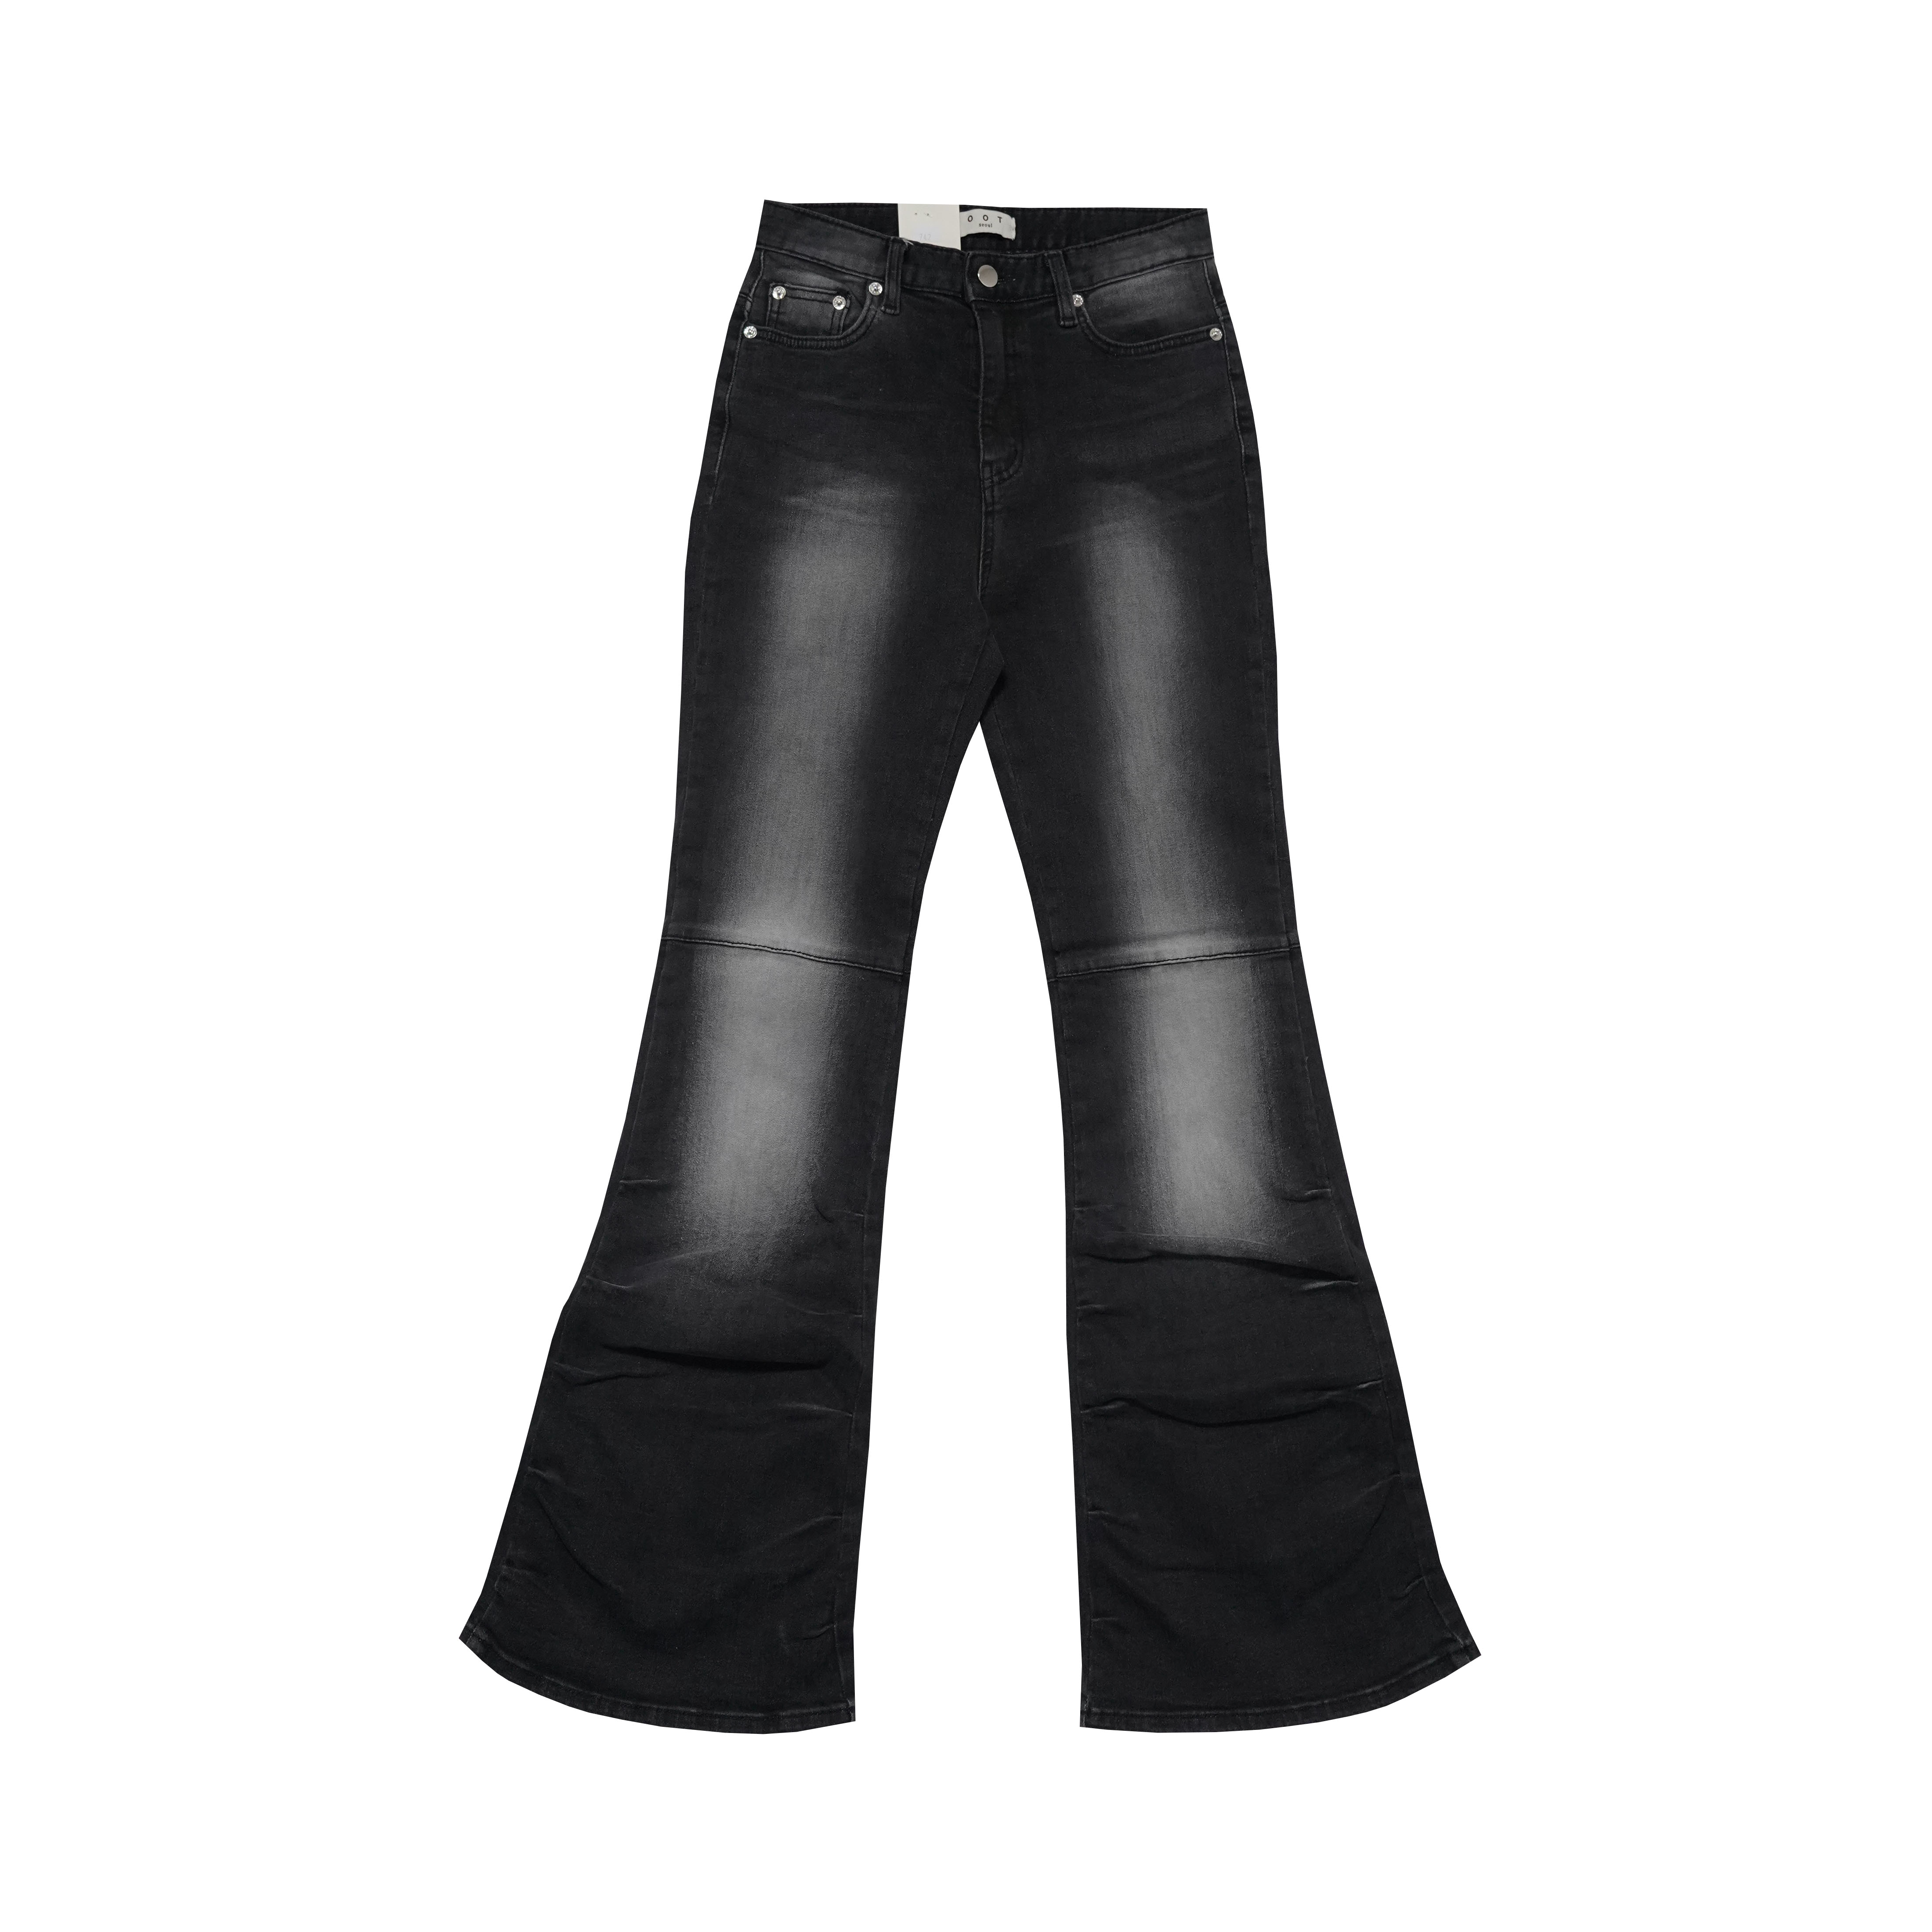 Ruched Bootcut Black Jeans